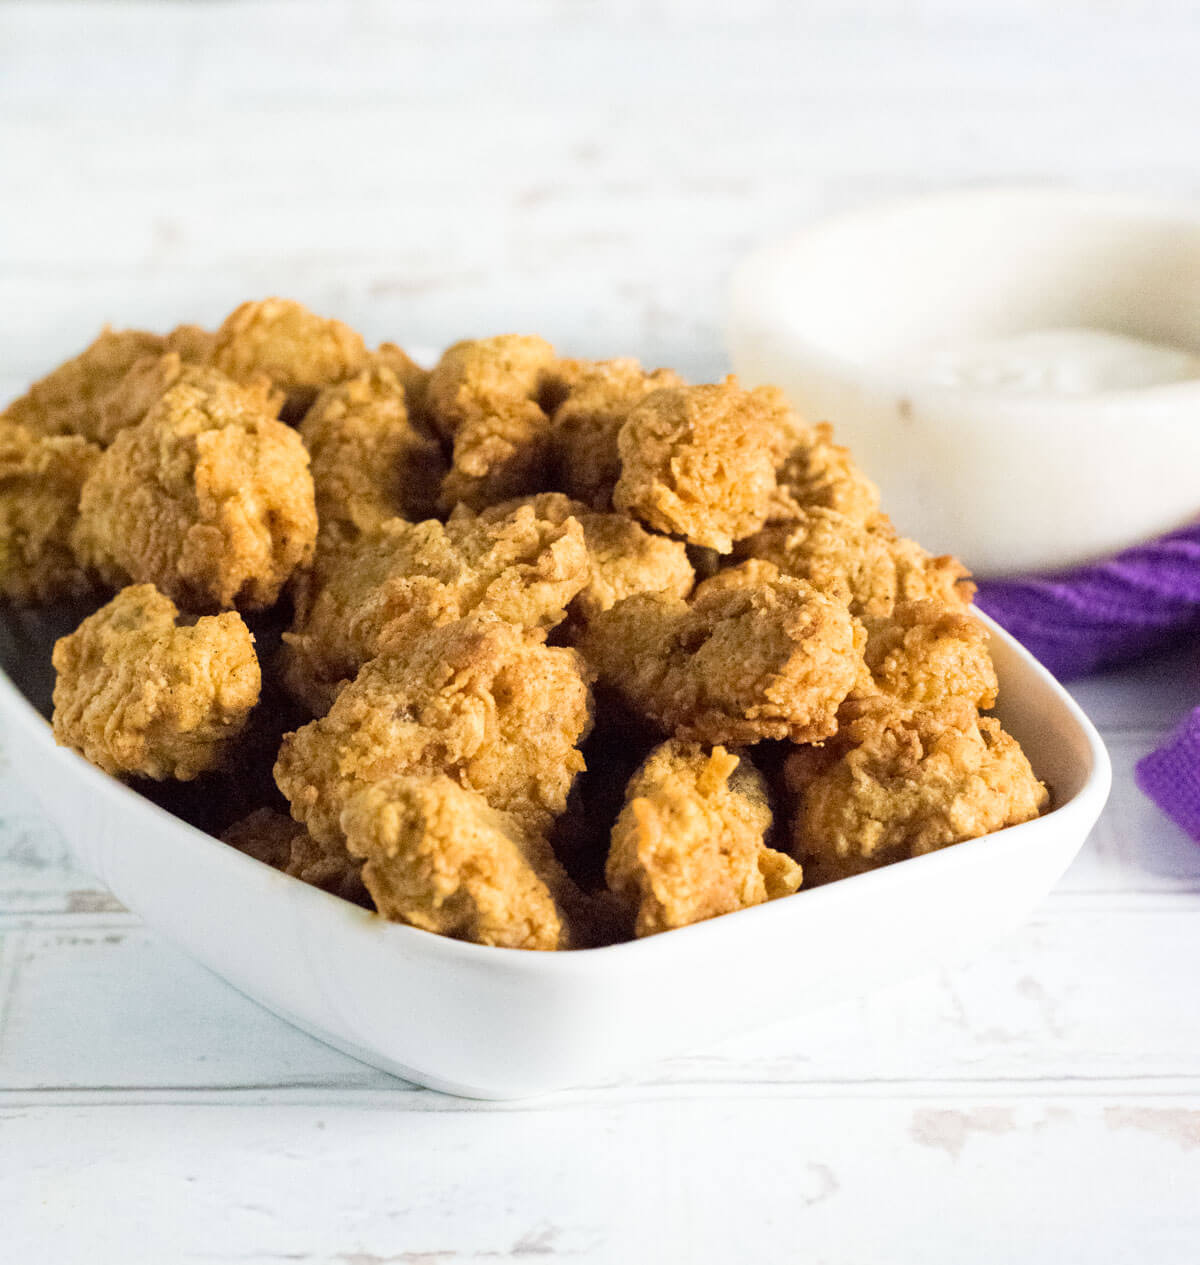 Crispy fried chicken gizzards in a white dish.